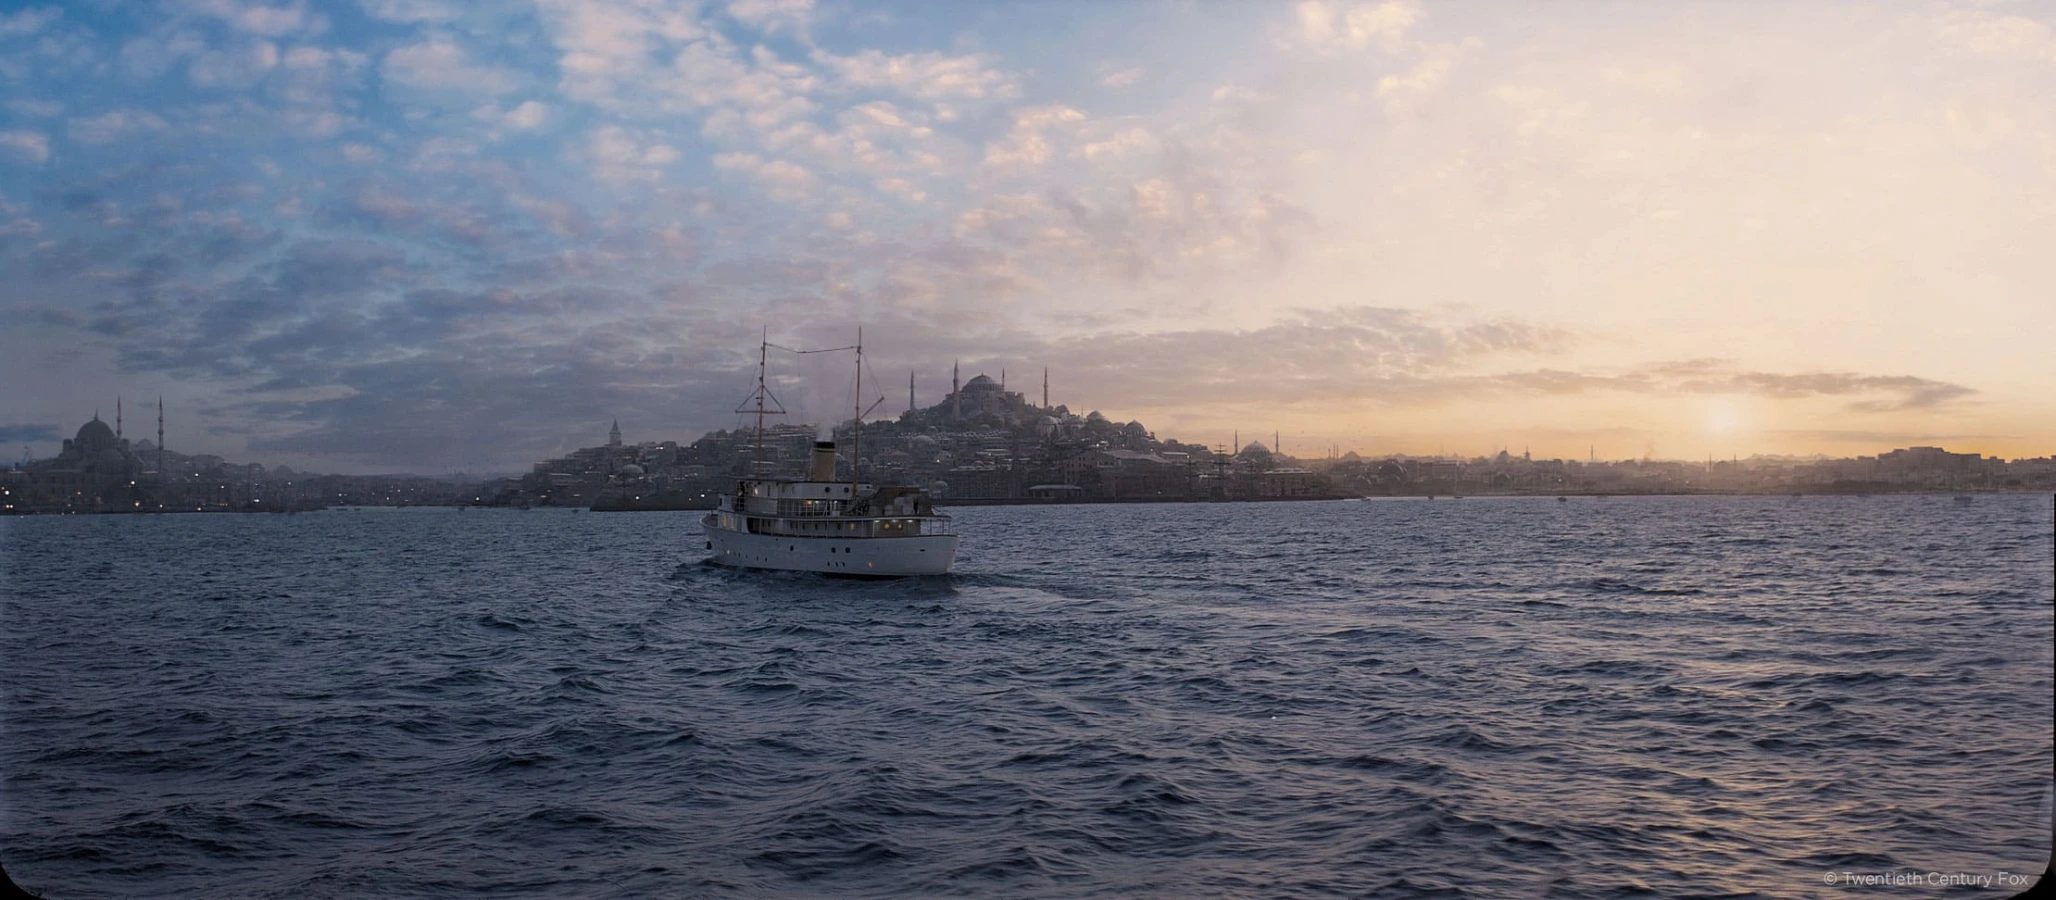  Murder on the Orient Express Istanbul boat on the Bosphore  Raynault vfx 